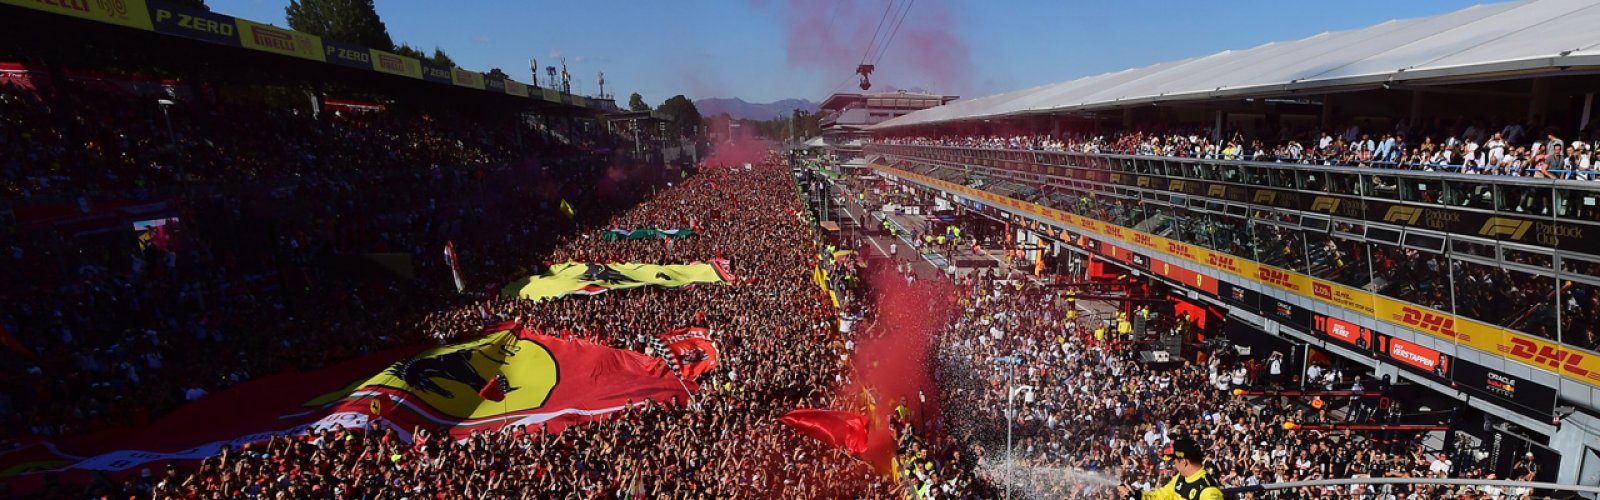 Italian Formula 1 Grand Prix travel & ticket packages image